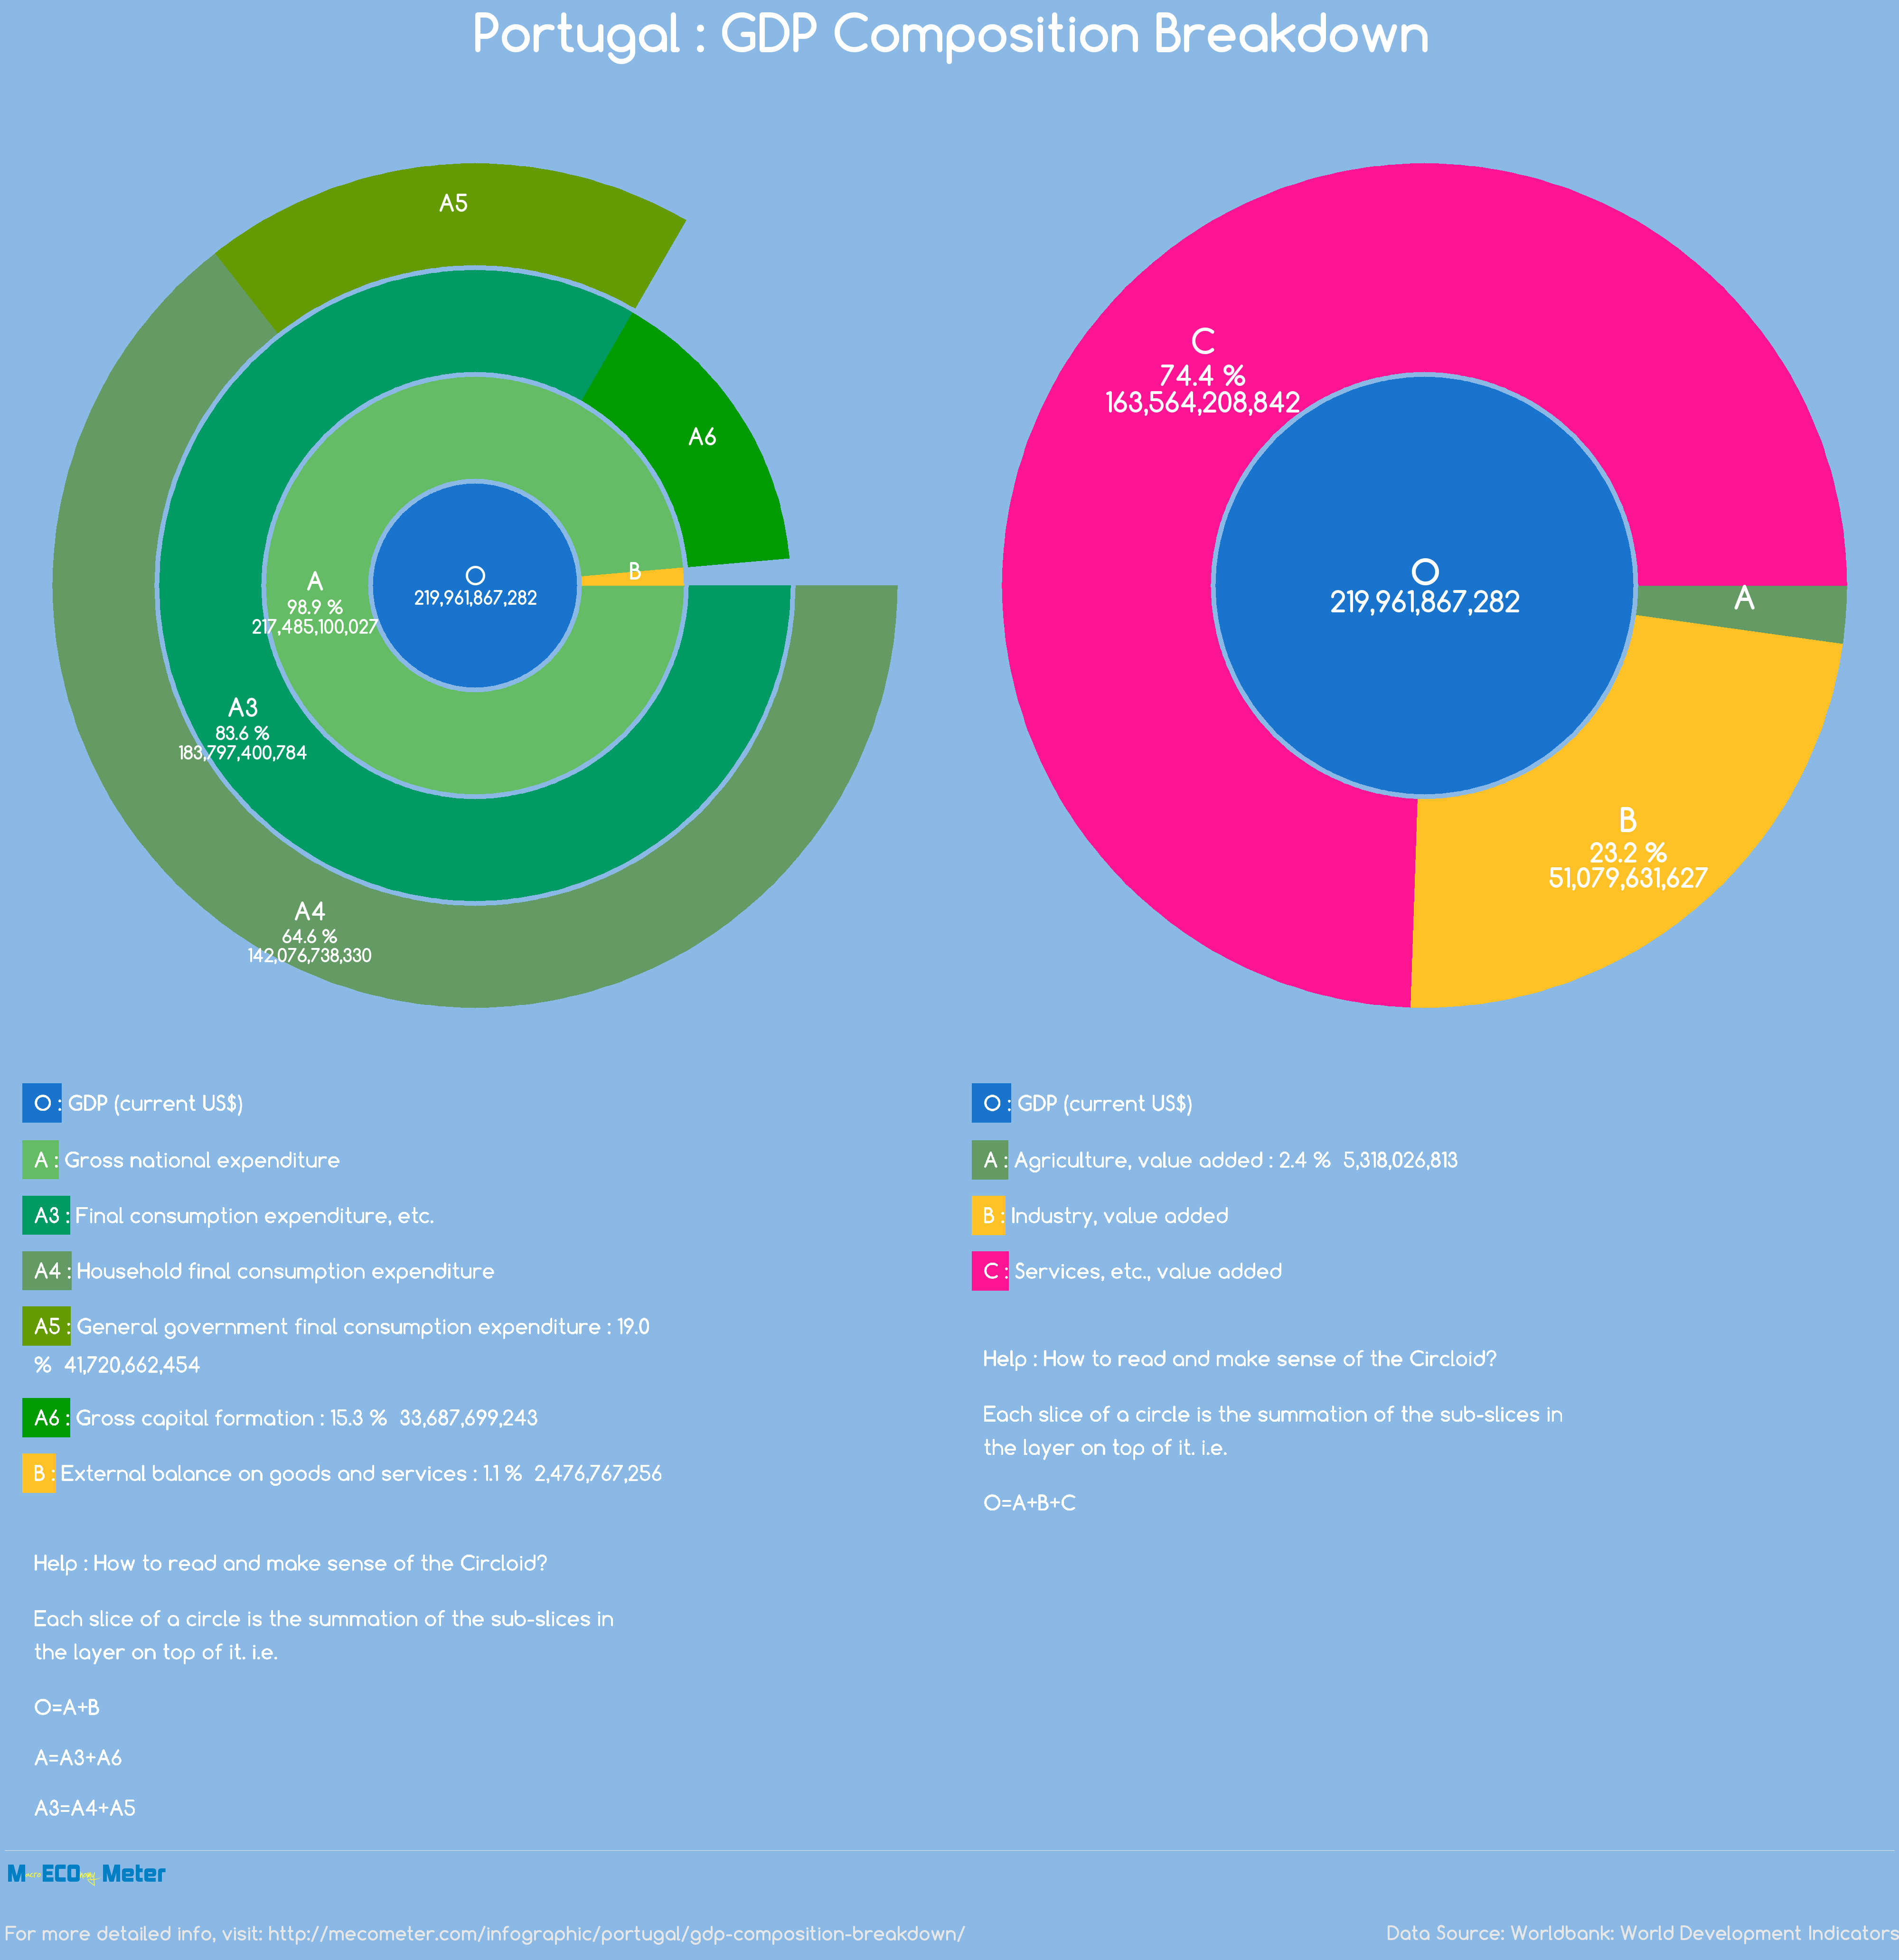 Portugal : GDP Composition Breakdown